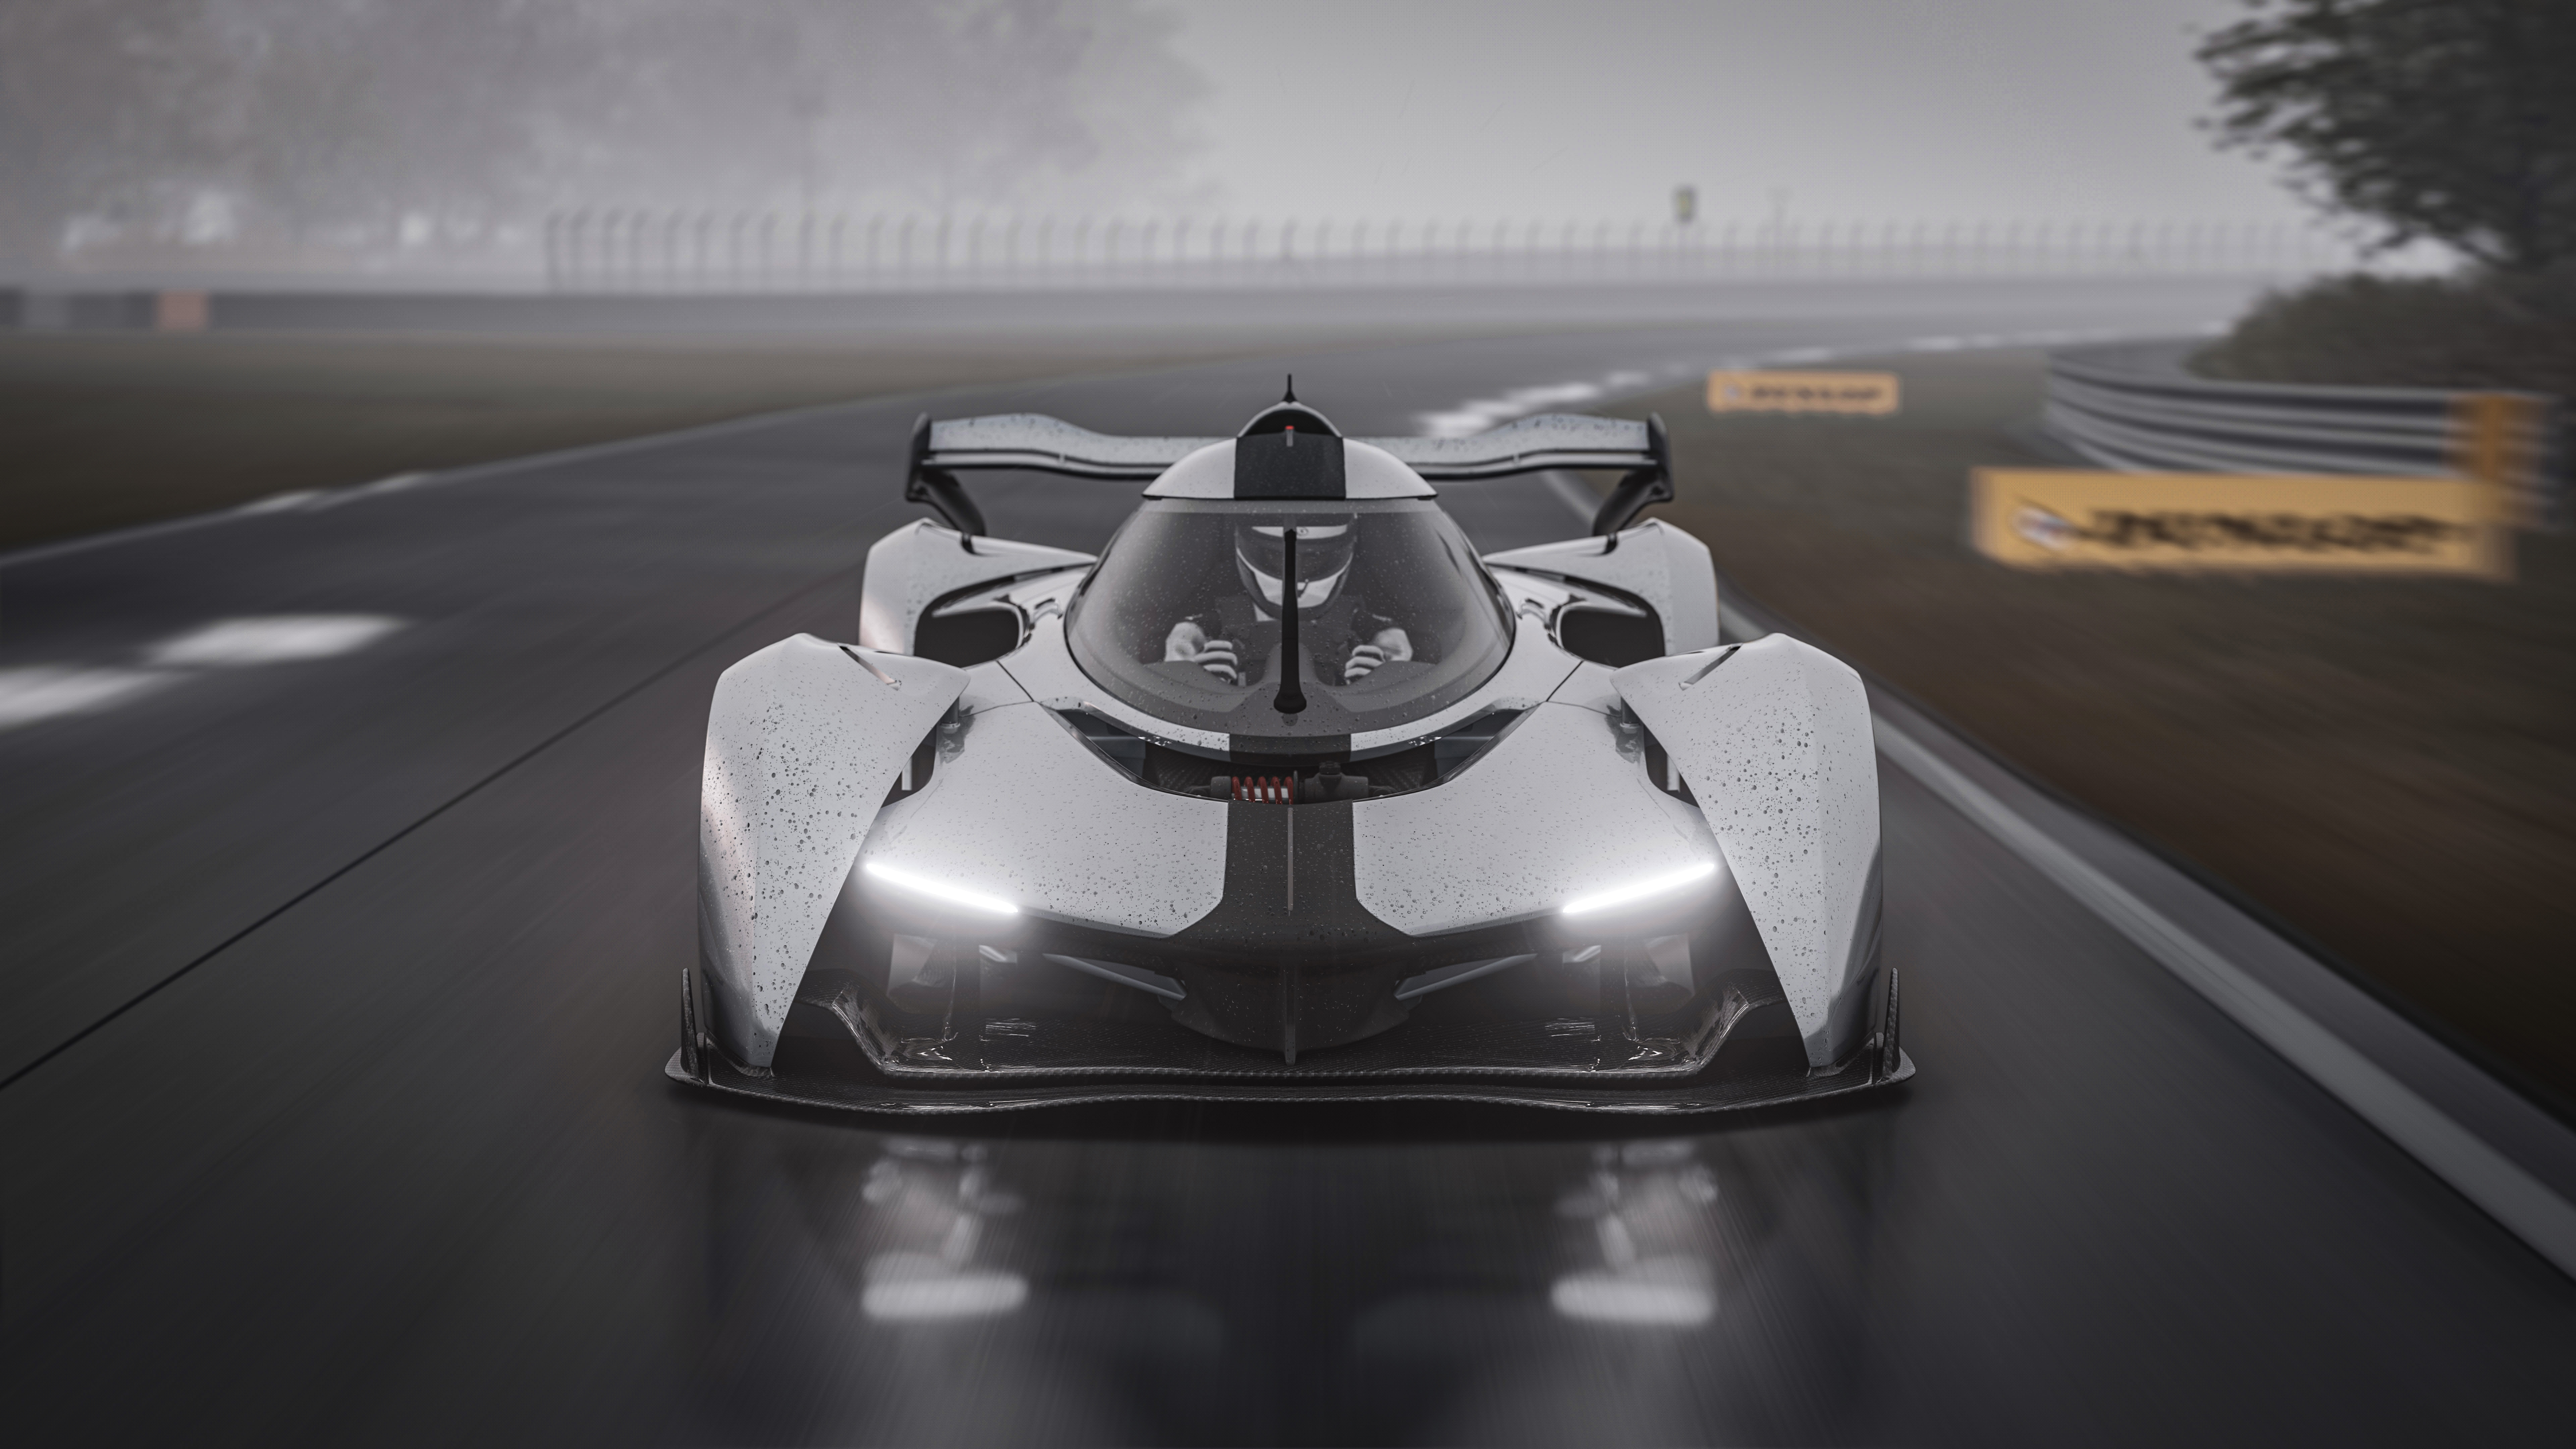 General 7680x4320 McLaren Solus GT car race tracks Assetto Corsa PC gaming vehicle video game art screen shot frontal view headlights video games reflection motion blur blurred white cars